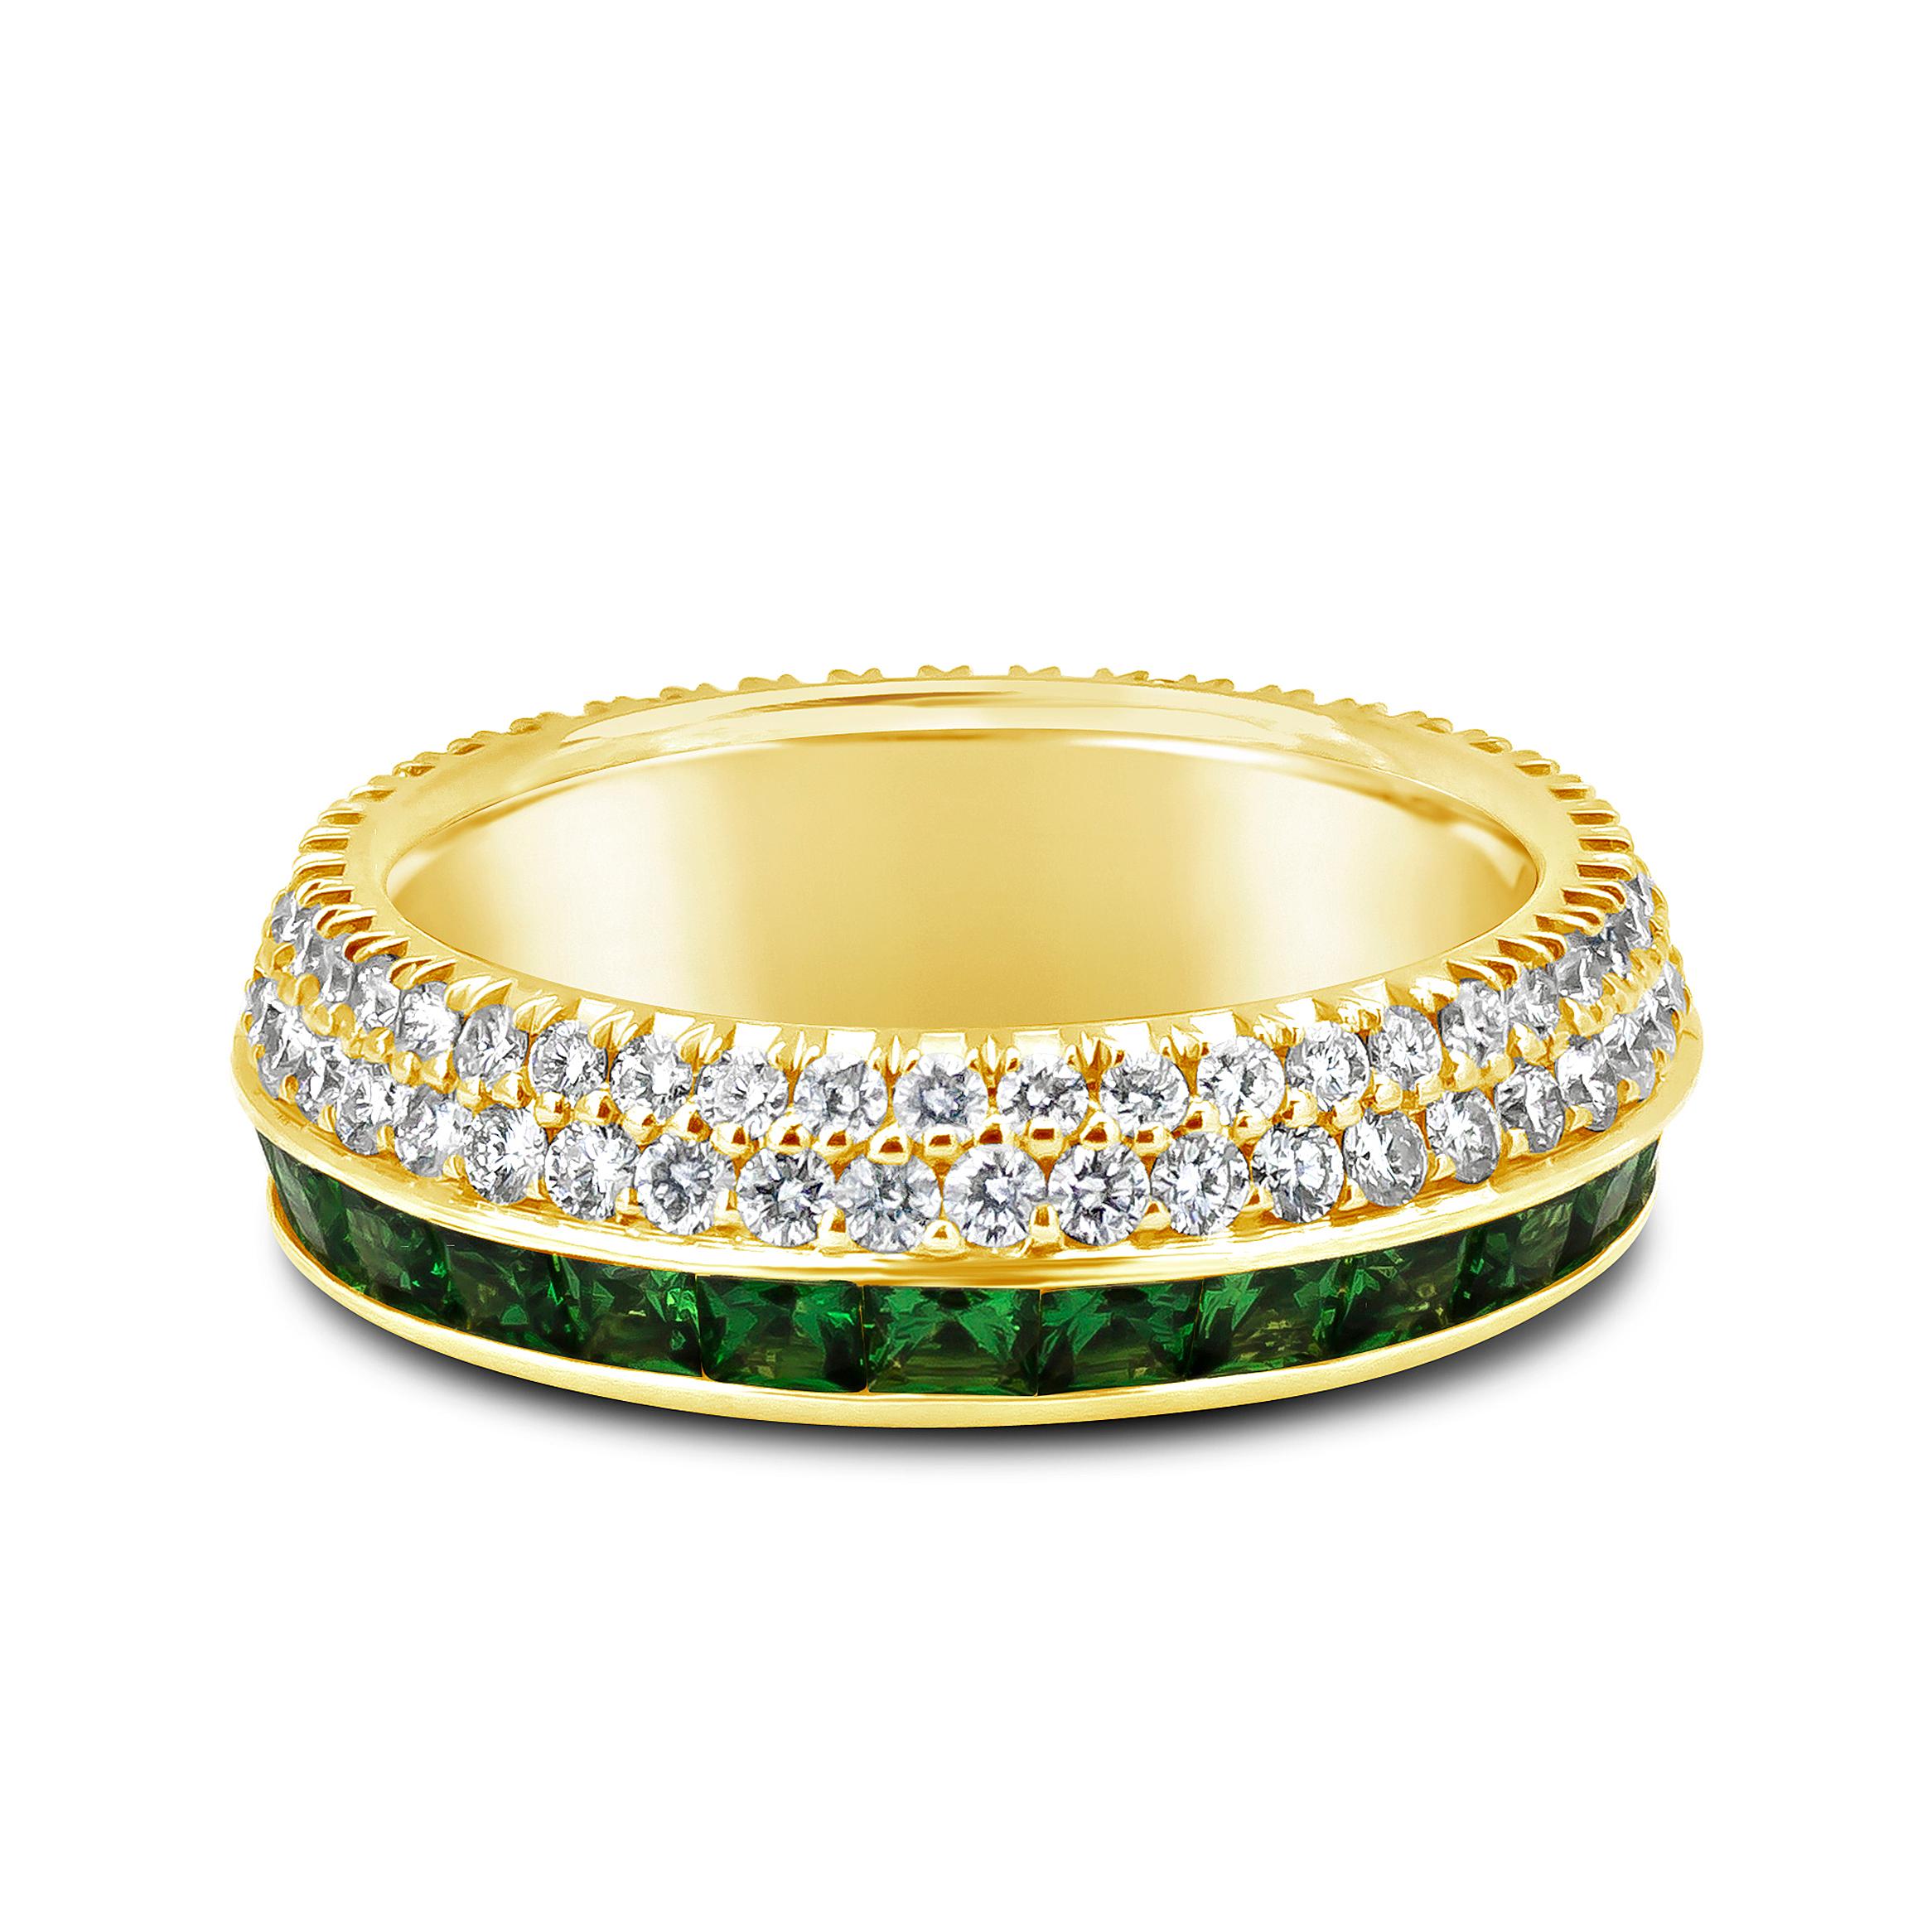 A modern and chic wedding band style showcasing a row of color-rich tsavorites weighing 2.26 carat, and round brilliant diamonds weighing 1.10 carats total. Made with 18K Yellow Gold Size 6.75 US.

Style available in different price ranges. Prices